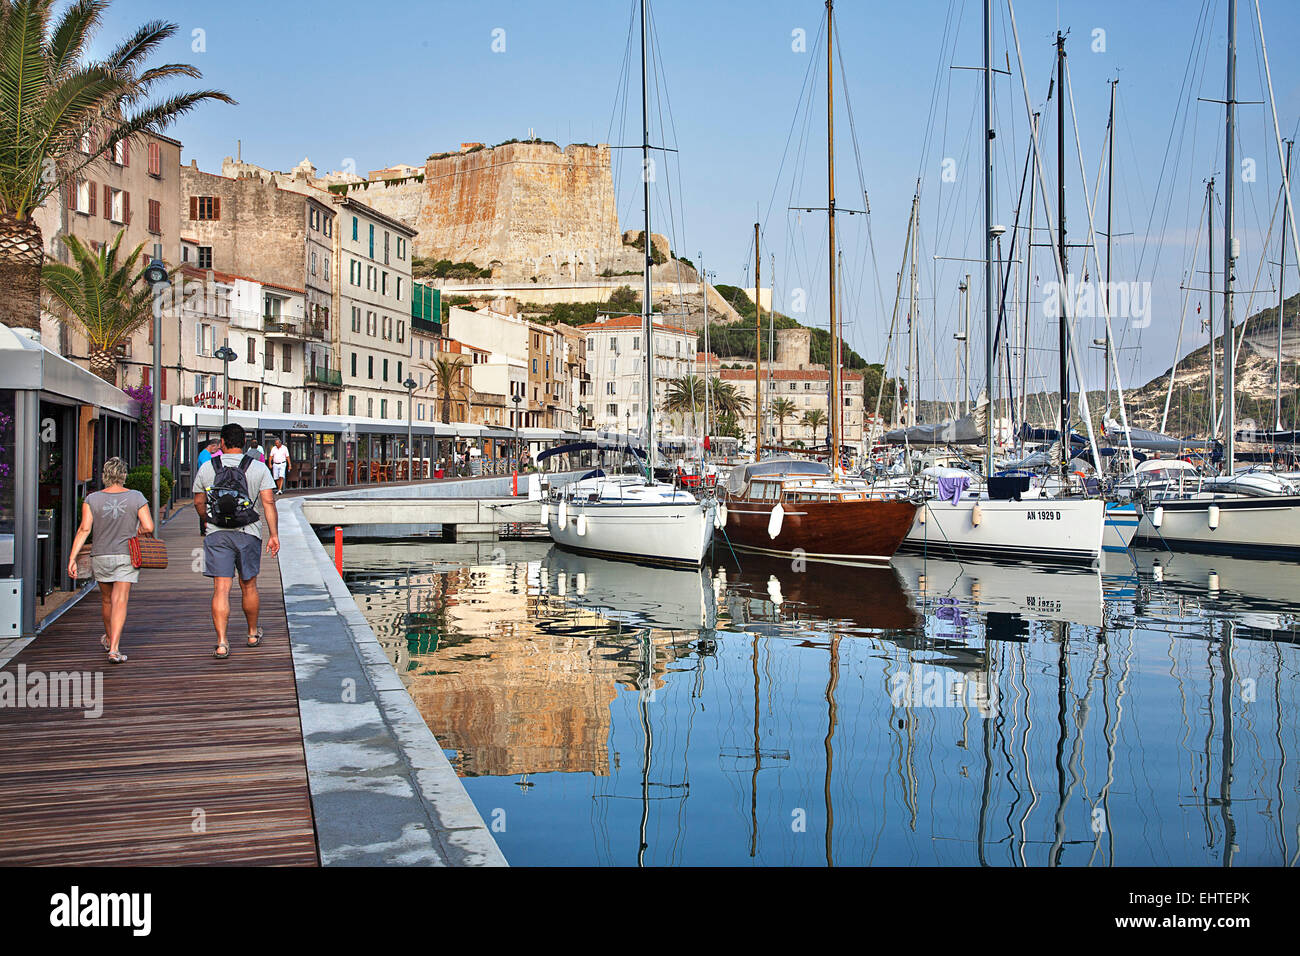 The quay at Bonifacio harbor is lined with boats, visitors and hotels. Stock Photo